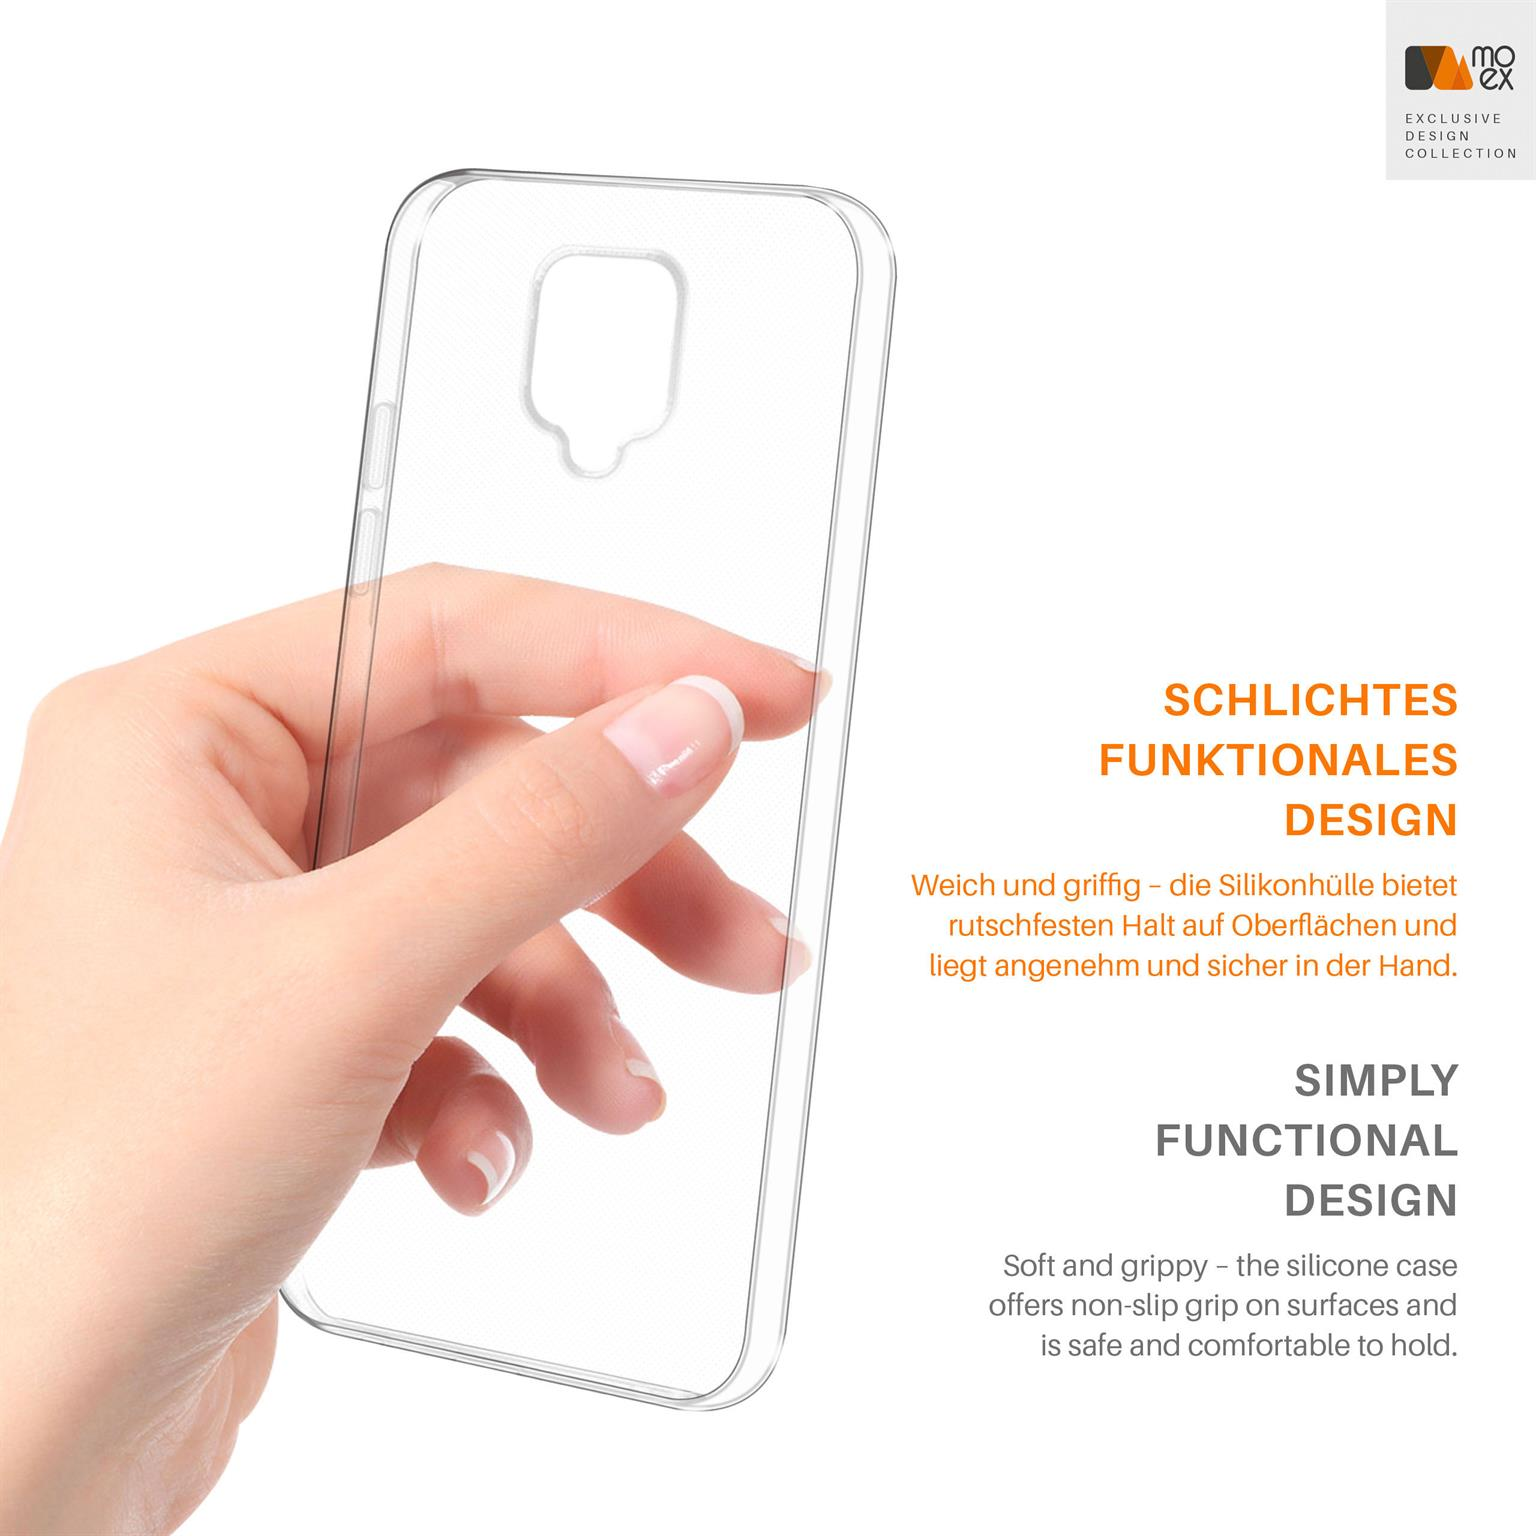 Aero Xiaomi, Backcover, Crystal-Clear Pro, Note 9 MOEX Redmi Case,